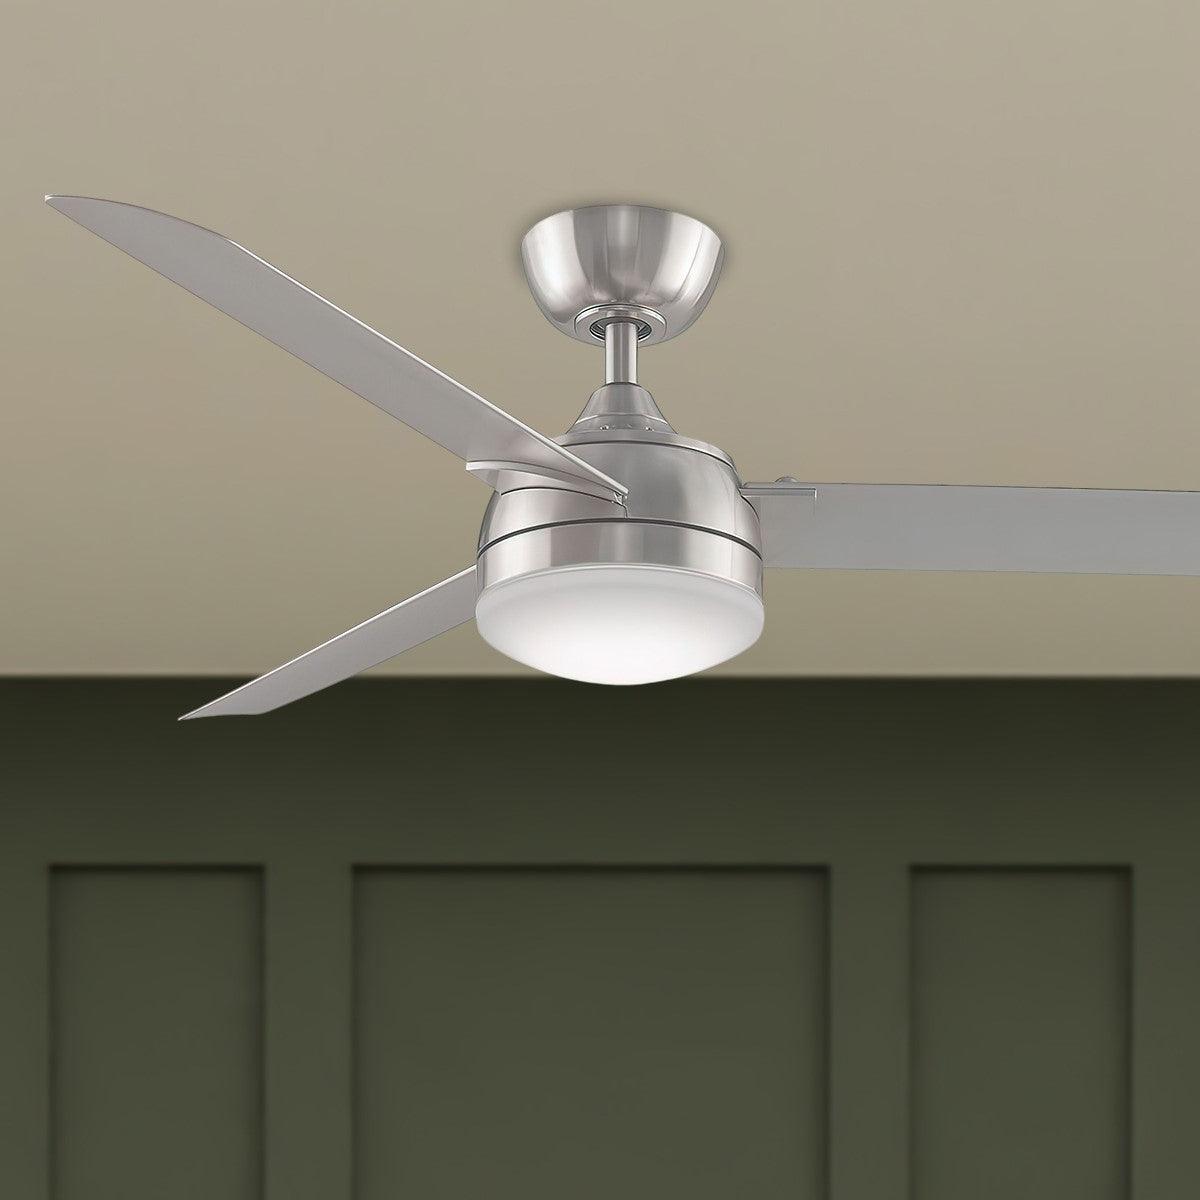 Xeno 56 Inch Large Modern Indoor/Outdoor Ceiling Fan With Light And Remote, Brushed Nickel Finish - Bees Lighting